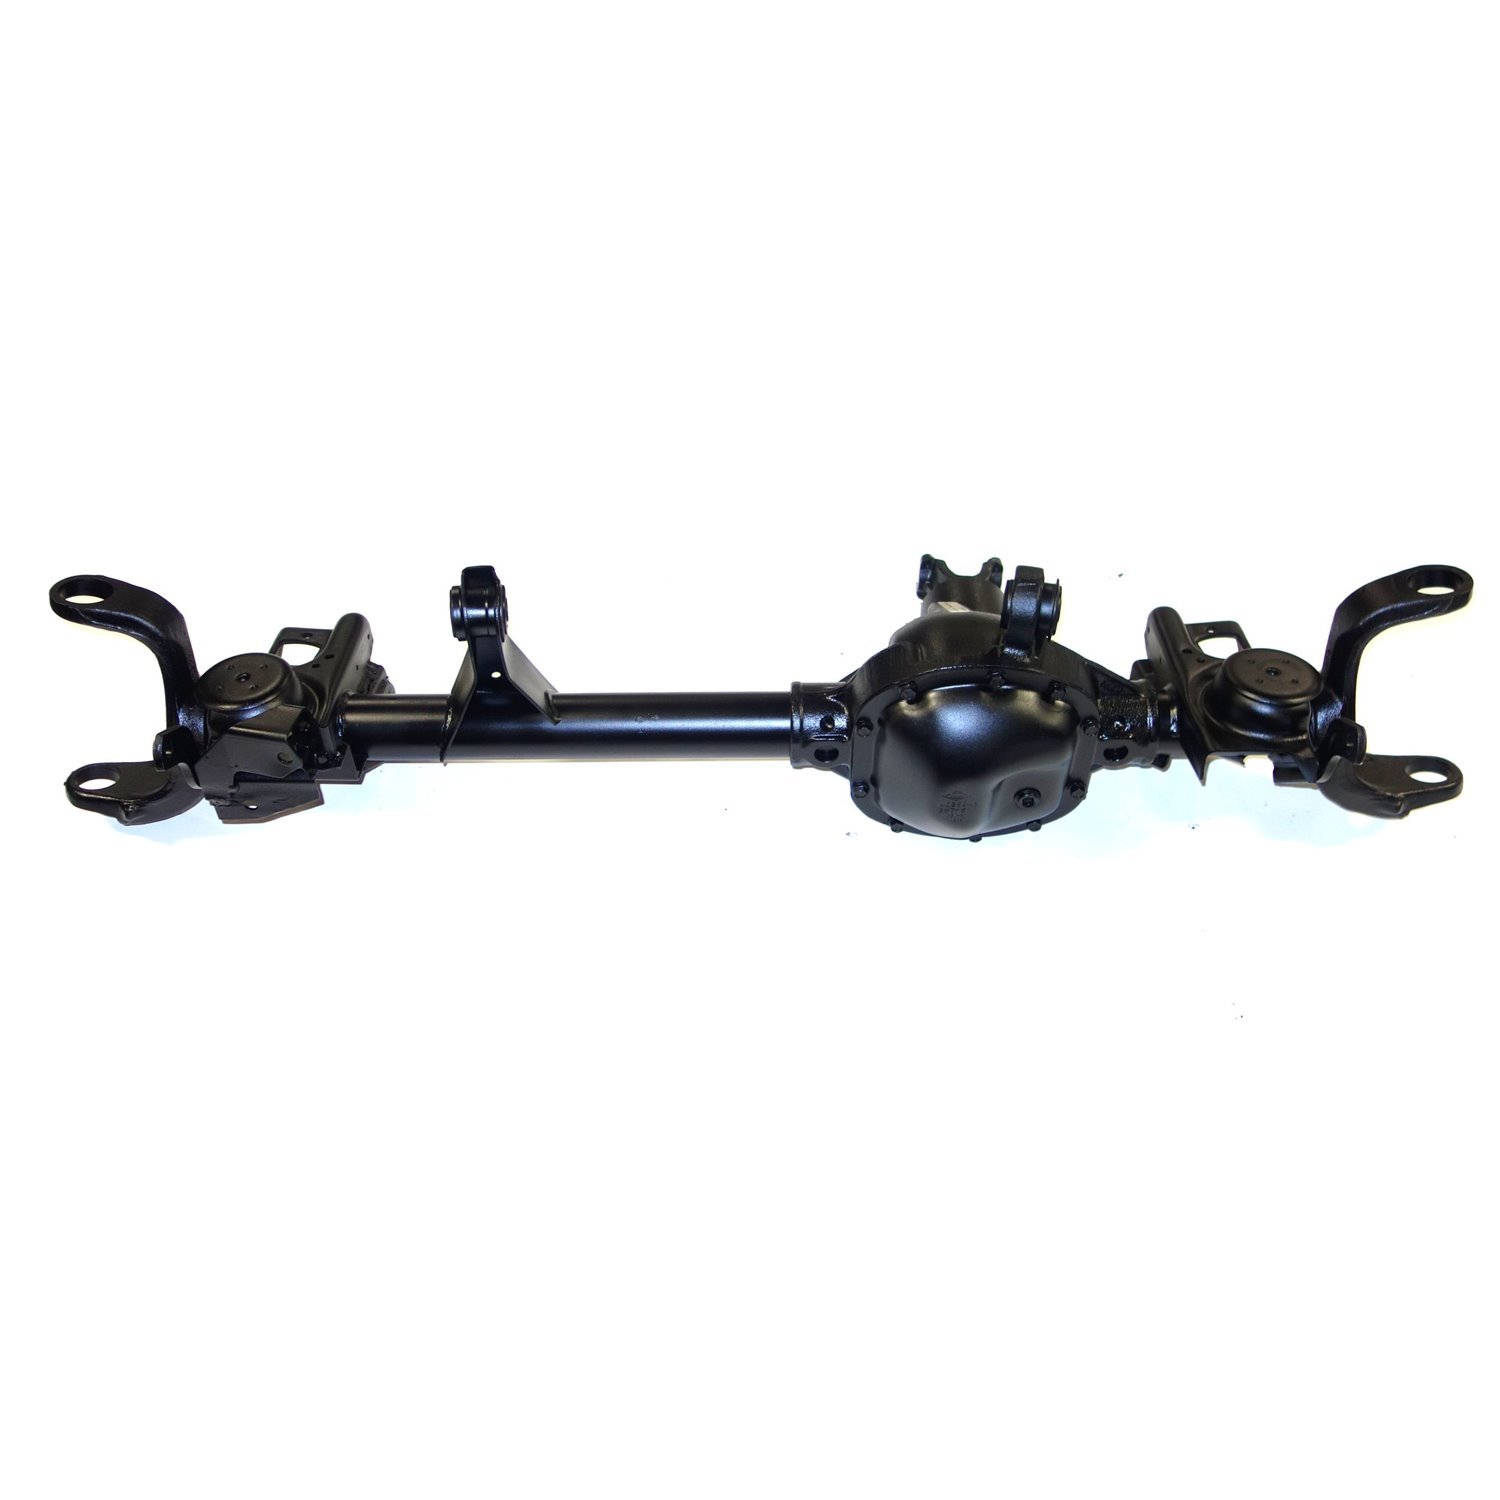 Remanufactured Complete Axle Assembly for Dana 30 90-95 Jeep Wrangler 3.55 Ratio with ABS